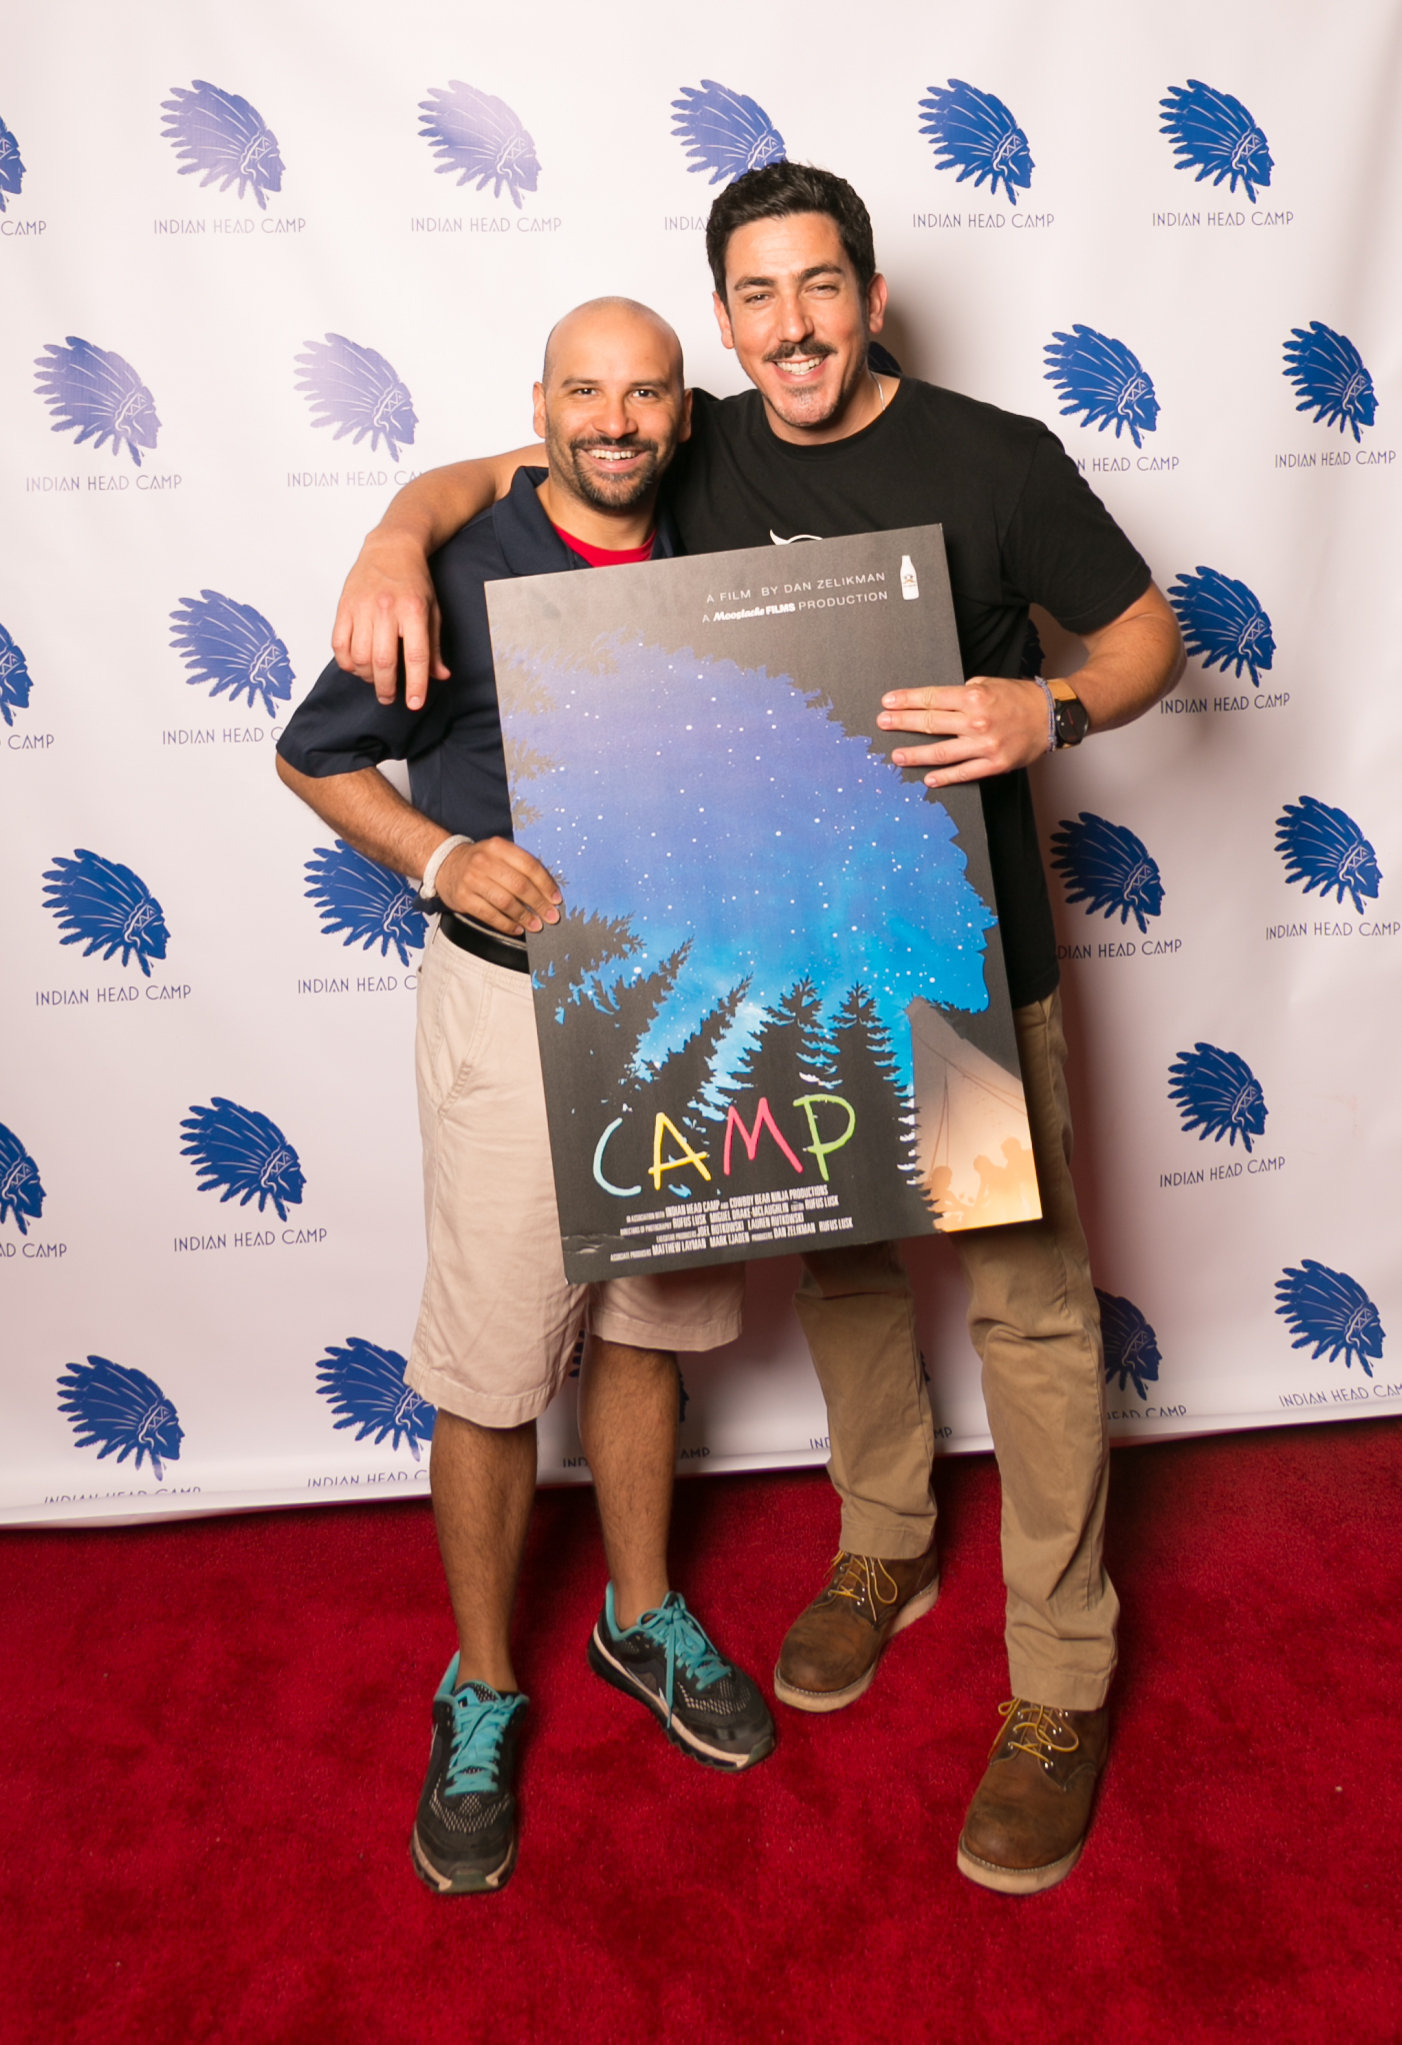 Dan Zelikman and Joey Baez at the premier of Camp at the Tarrytown Music Hall in New York.